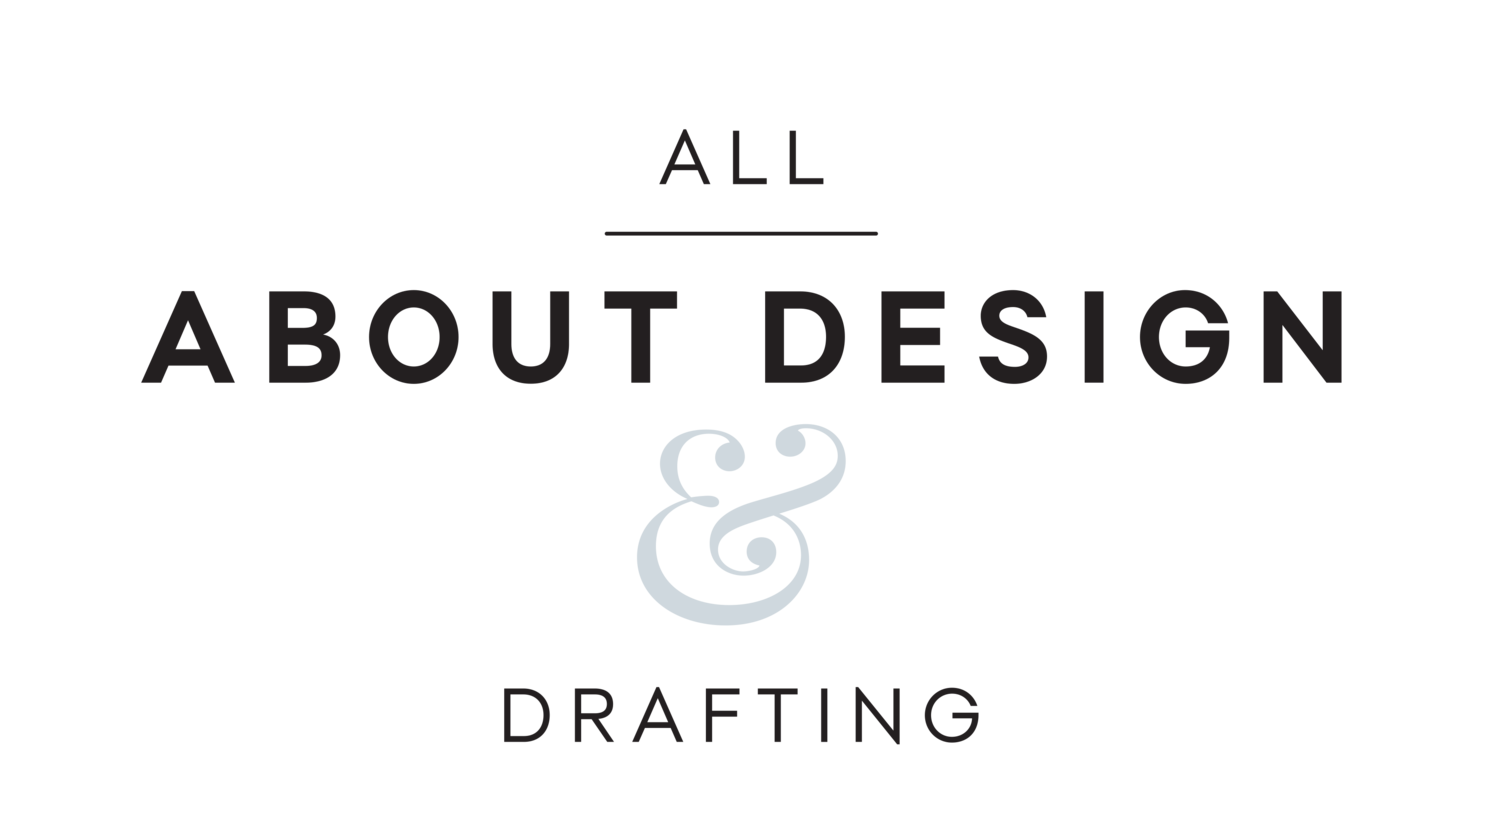 All About Design & Drafting